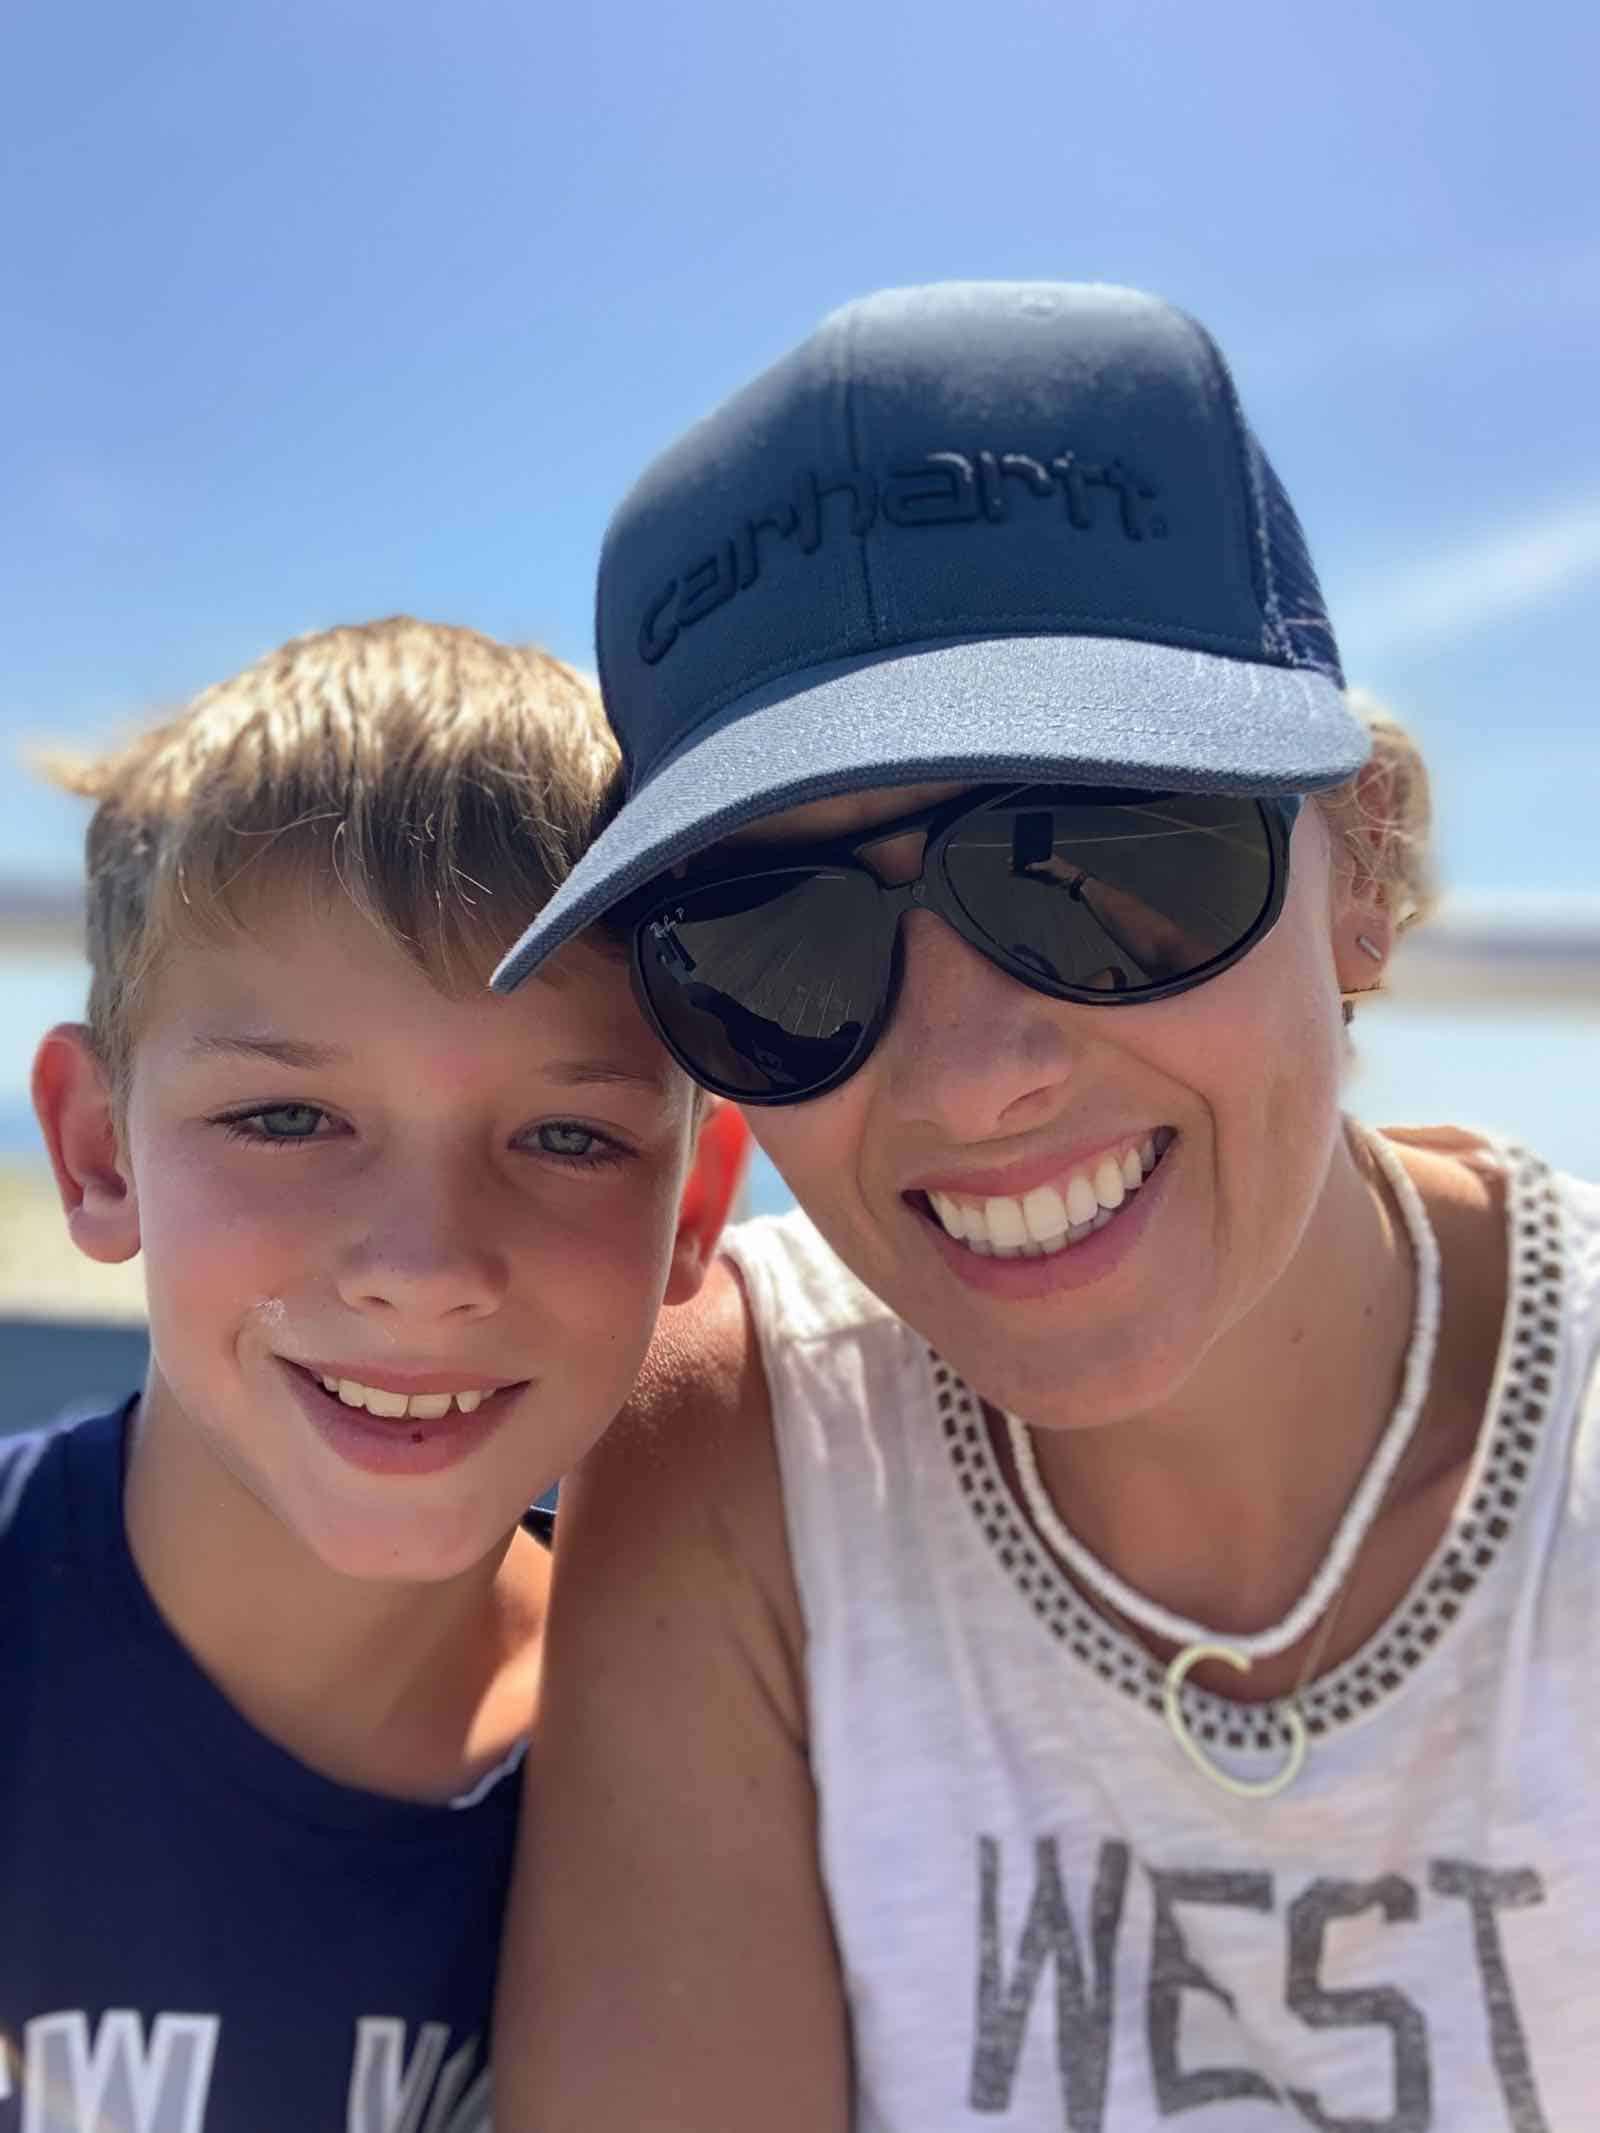 mother and son at the beach